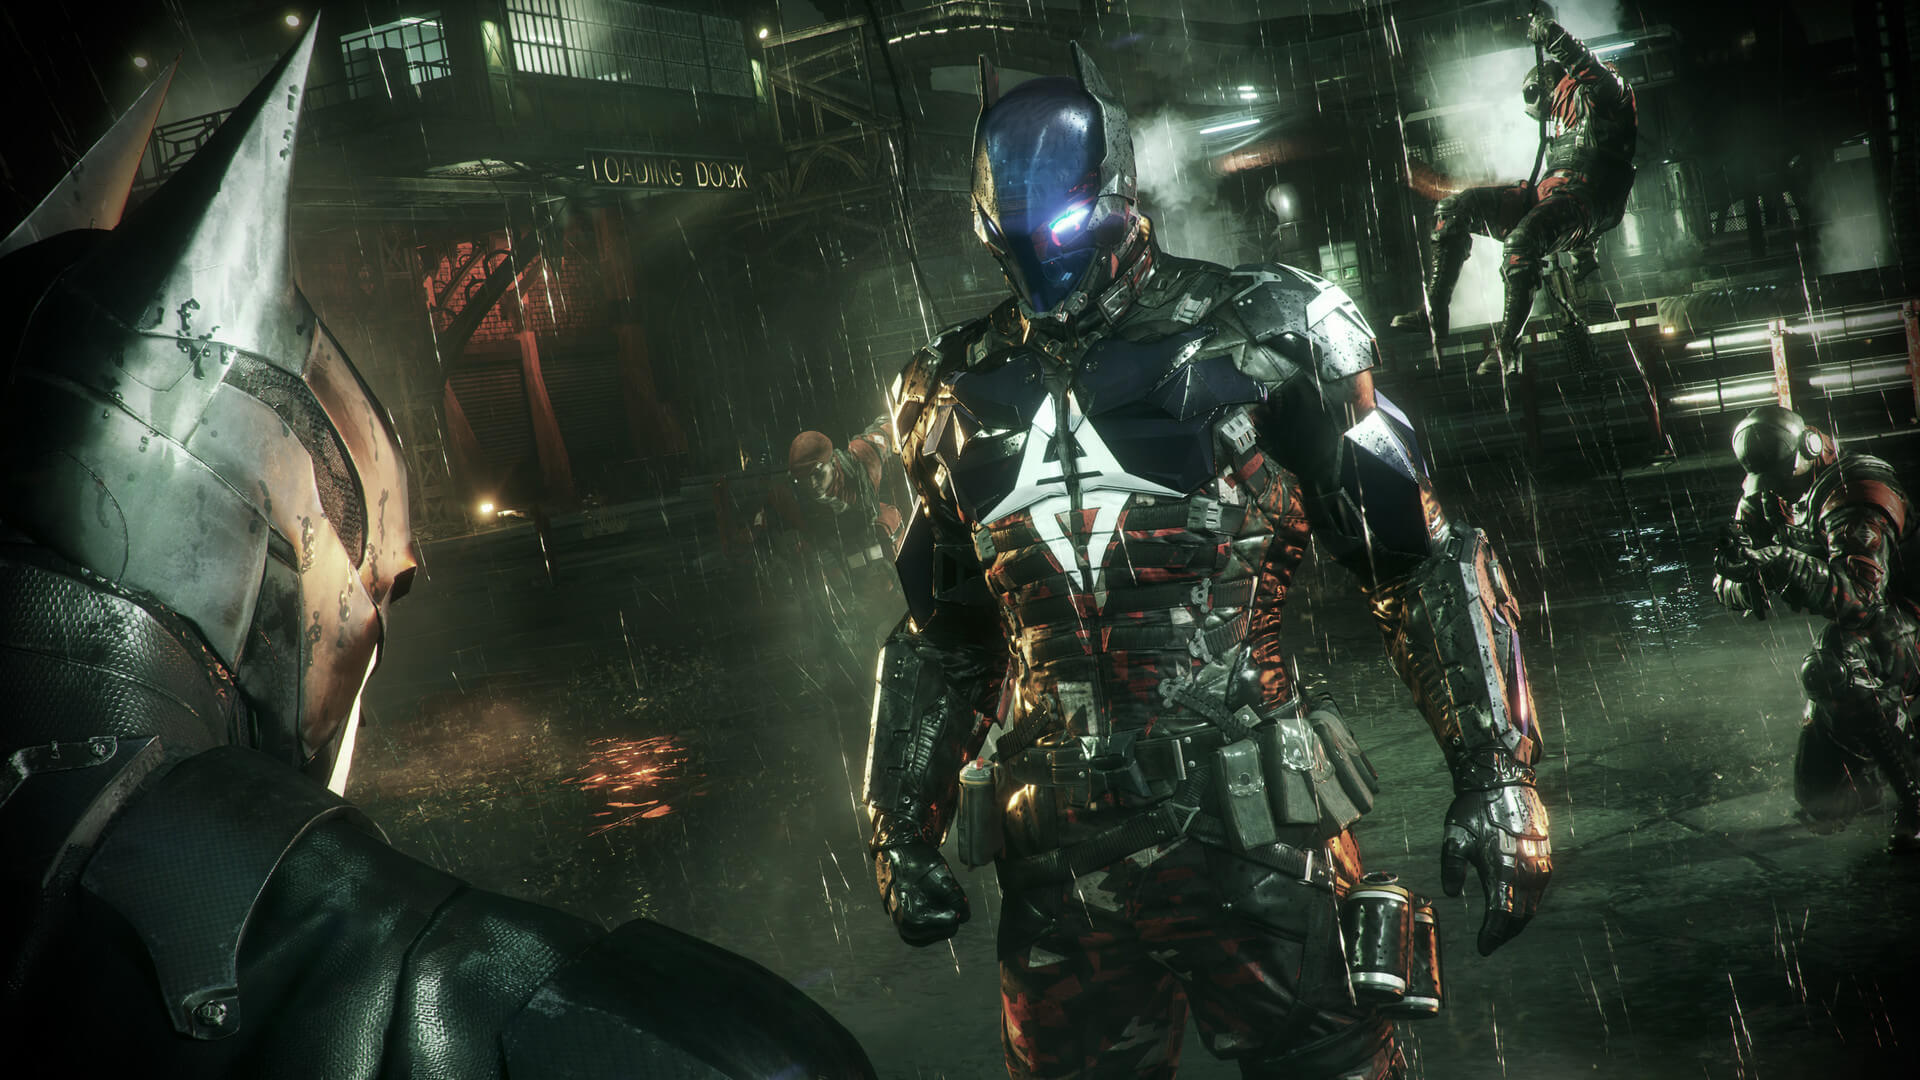 the arkham knights download